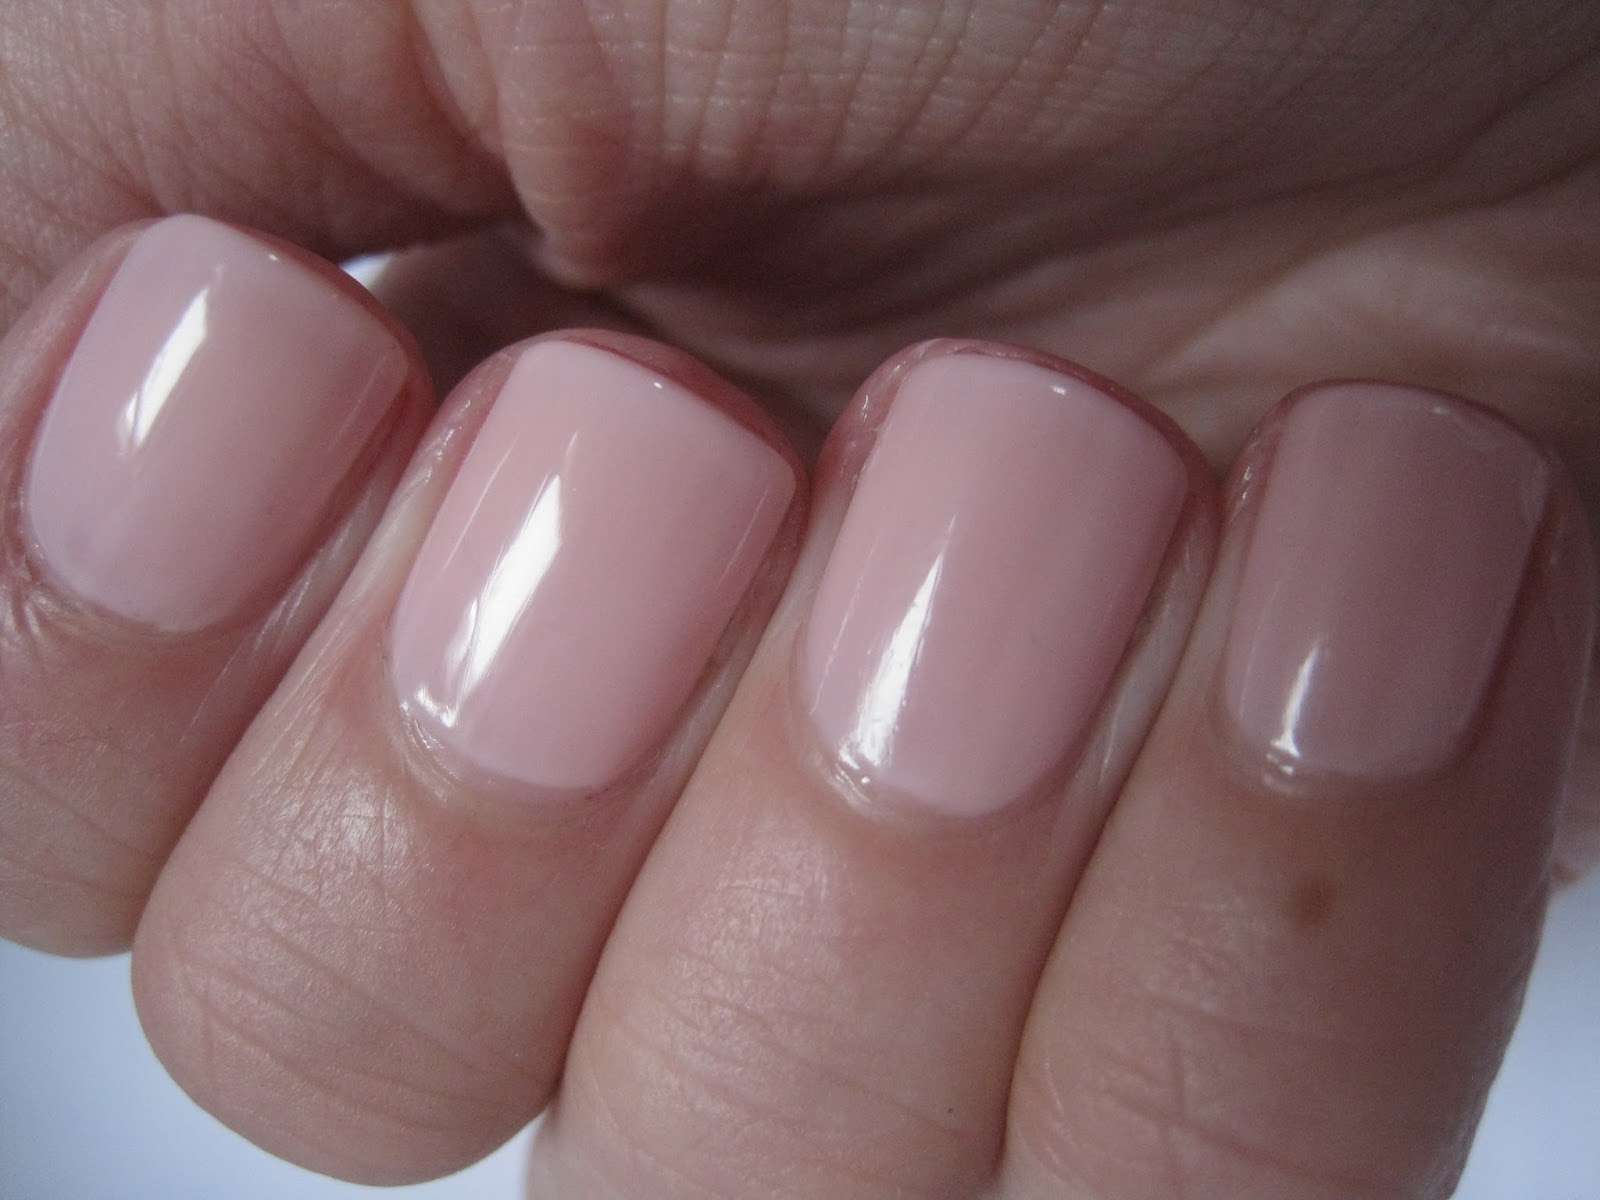 China Glaze Nail Lacquer in Innocence - wide 2